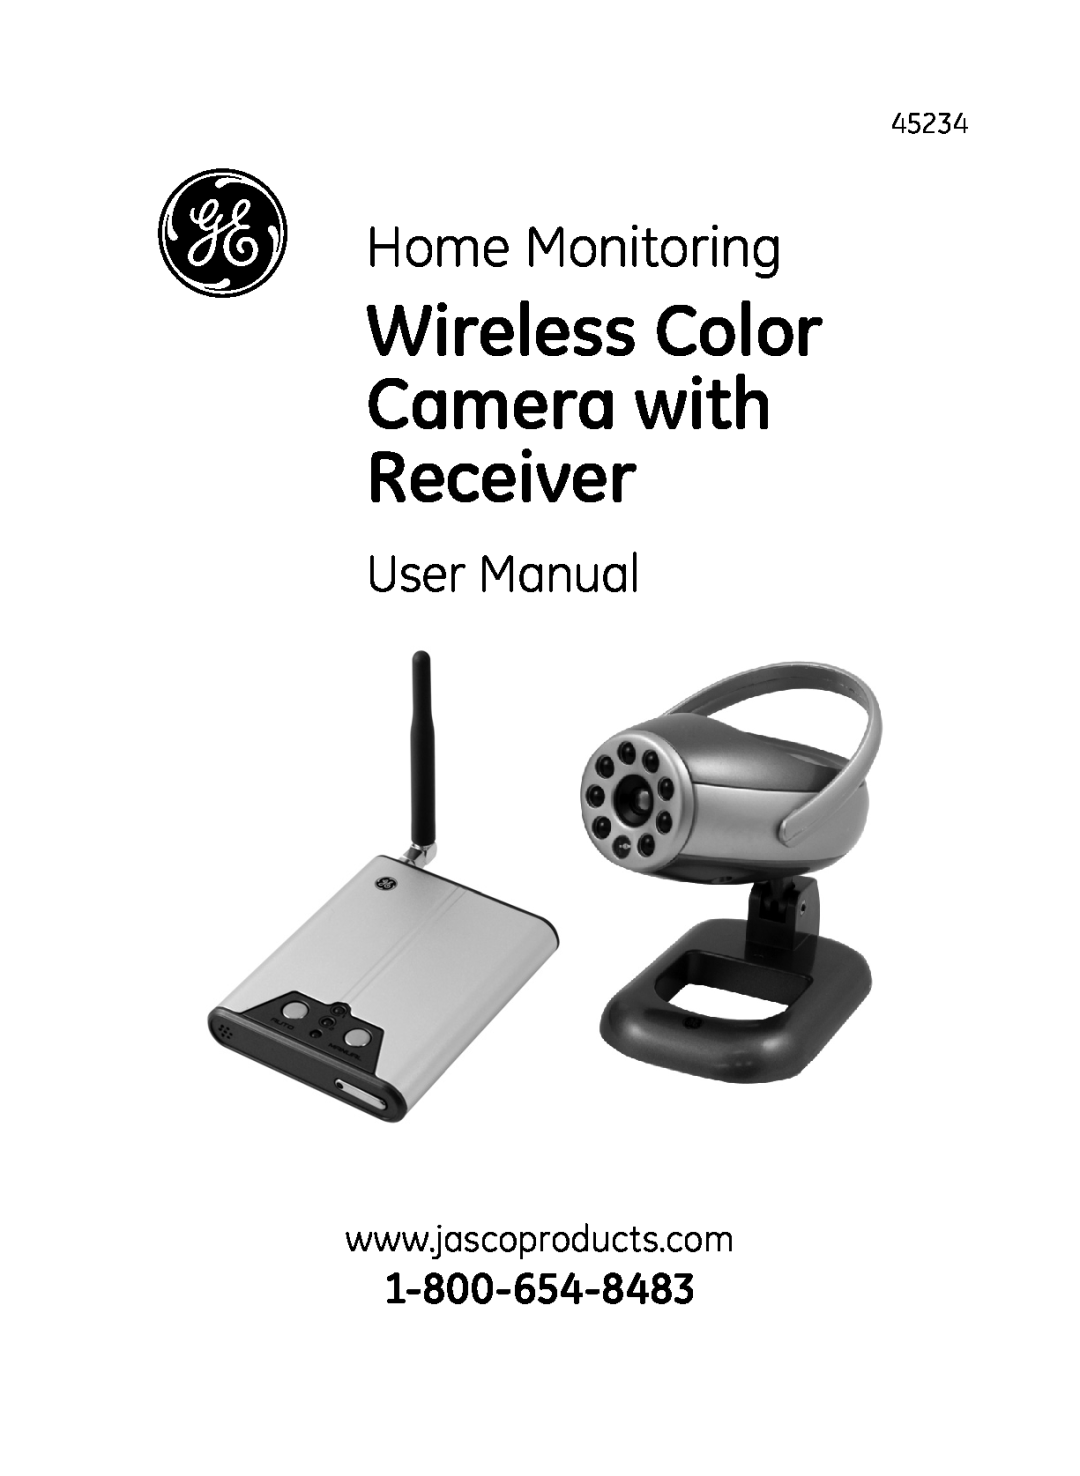 Jasco 45234 user manual Wireless Color Camera with Receiver, Home Monitoring 